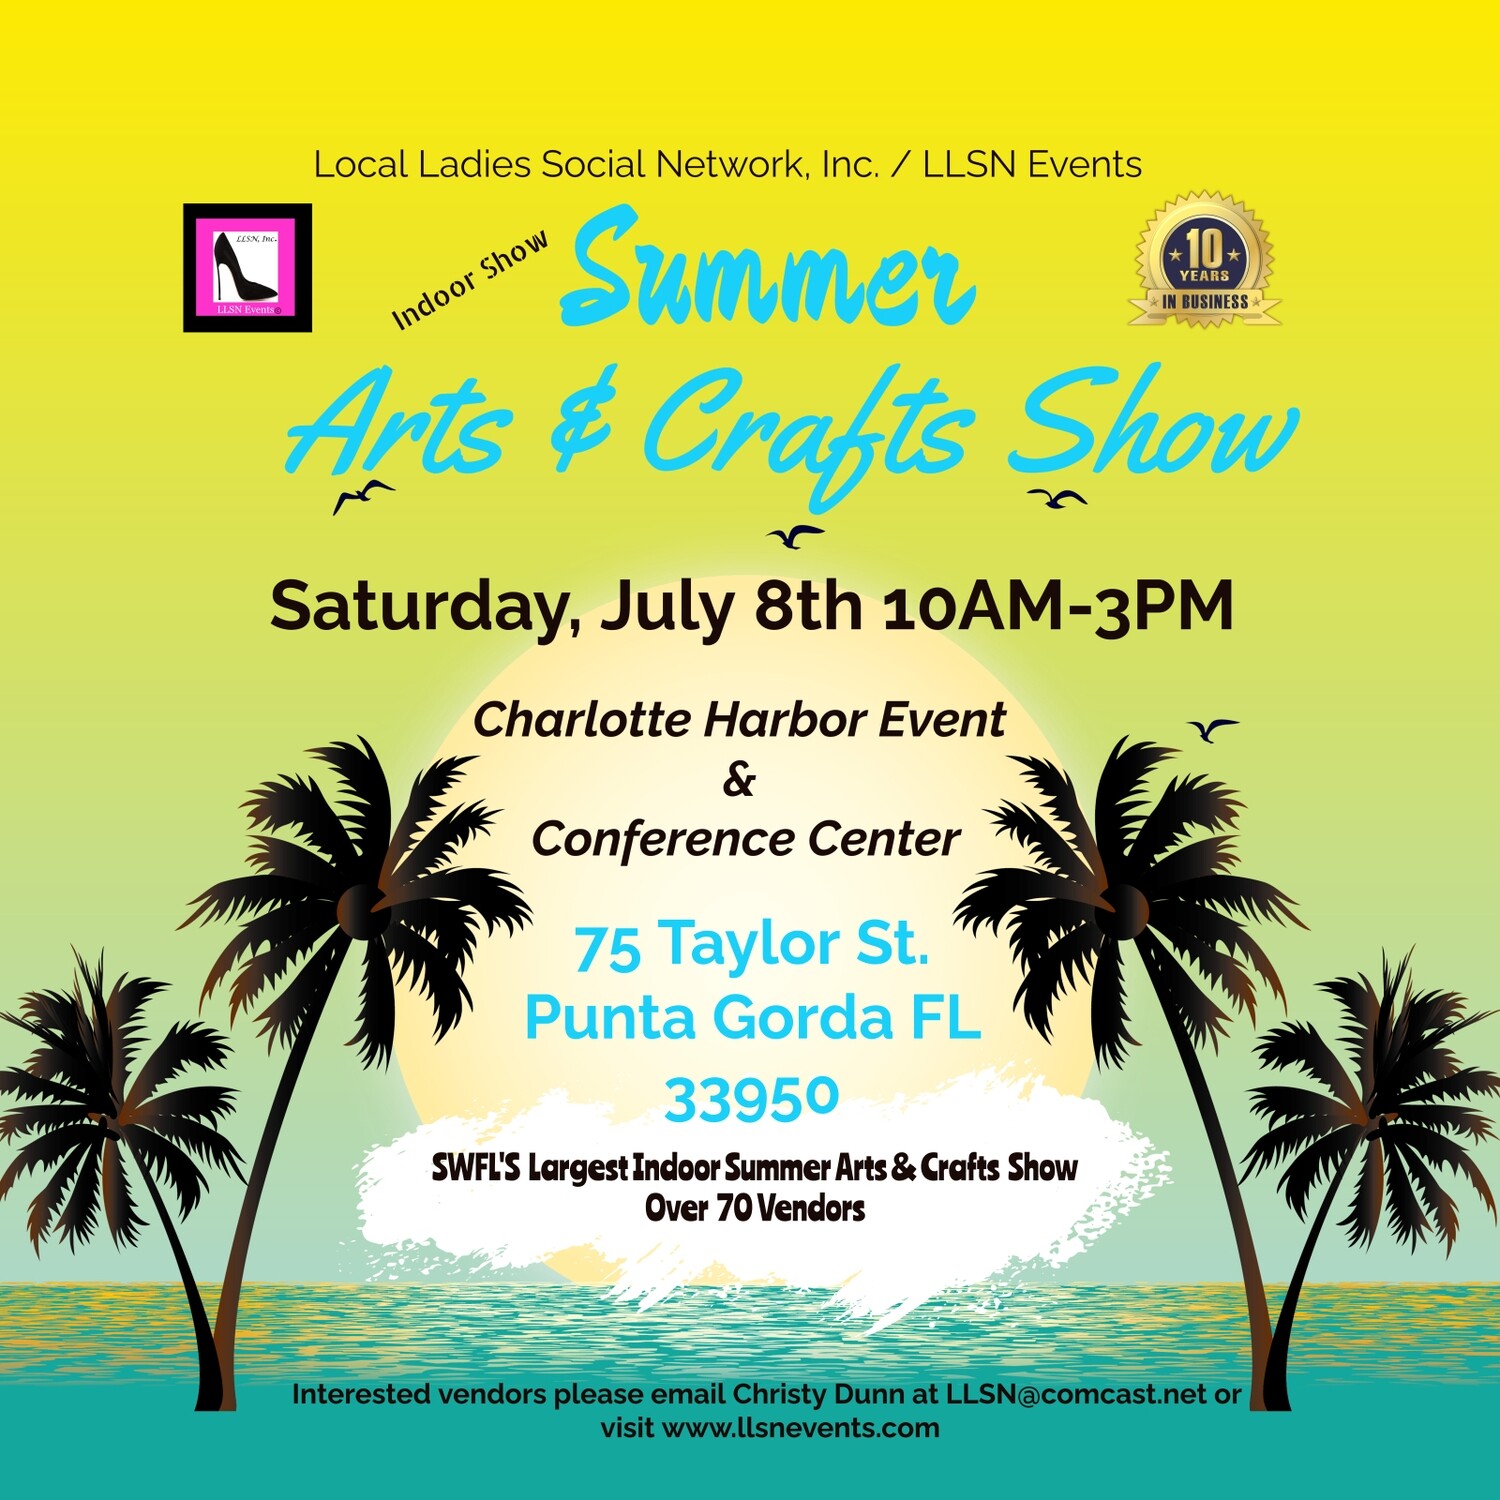 INDOOR Summer Arts & Crafts Show at the Charlotte Harbor Event Center- Sat. July 8th 10AM-3PM